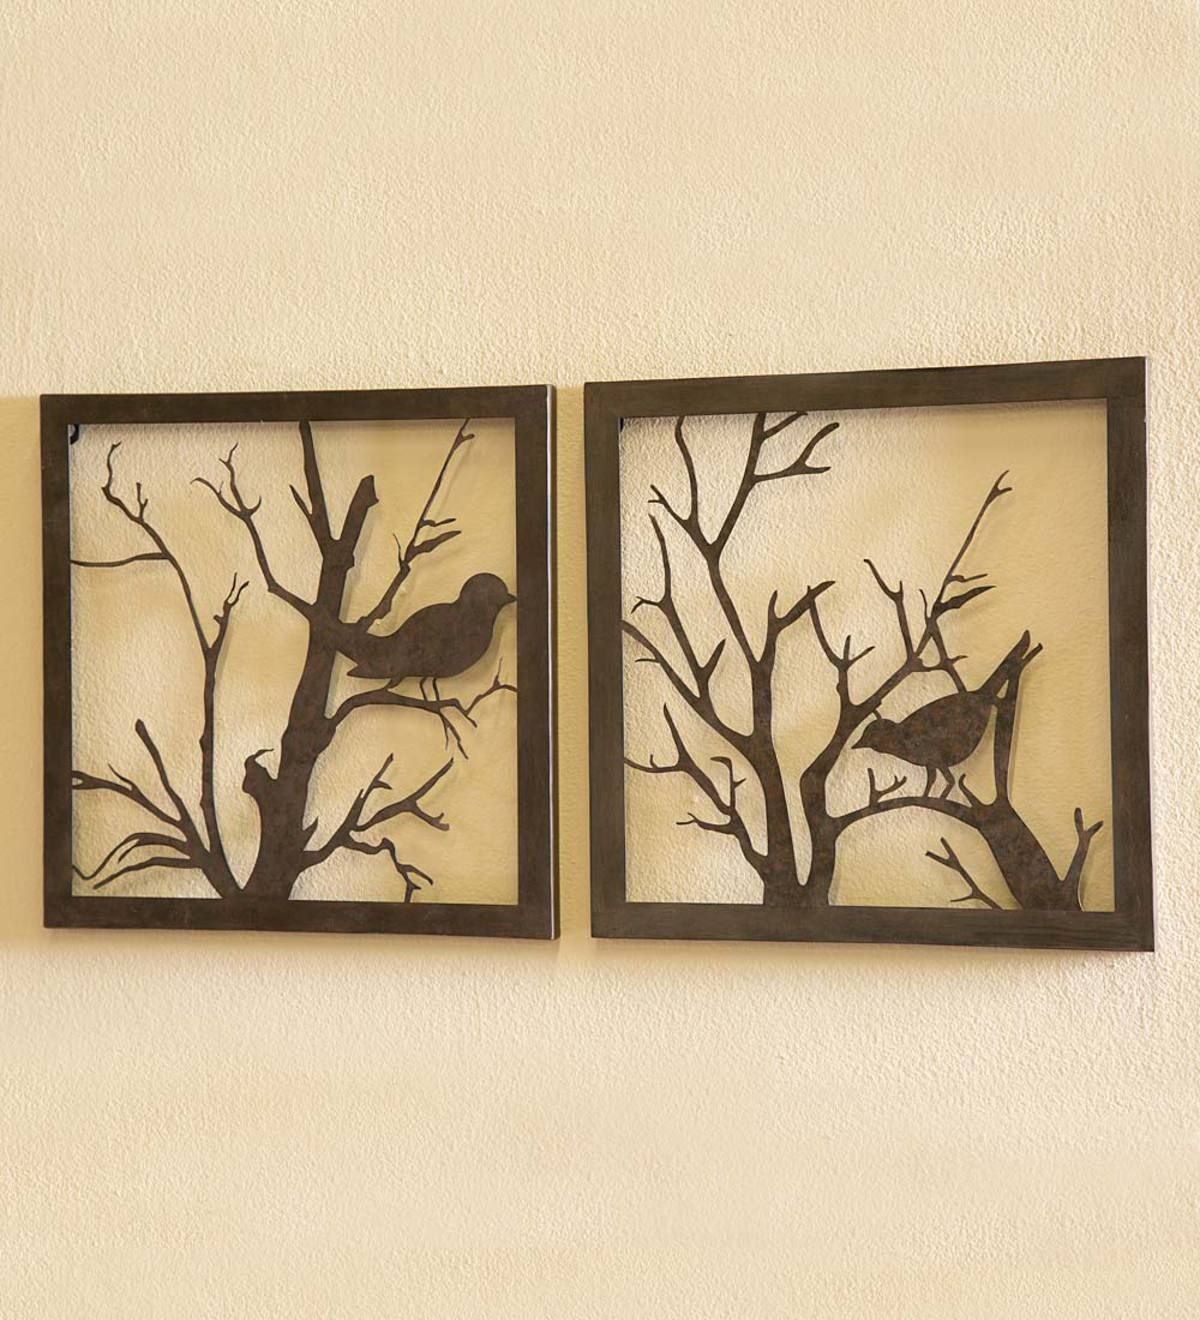 Metal Bird Wall Art, Set Of 2 | Plowhearth With Regard To Most Up To Date Metal Bird Wall Art (View 10 of 20)